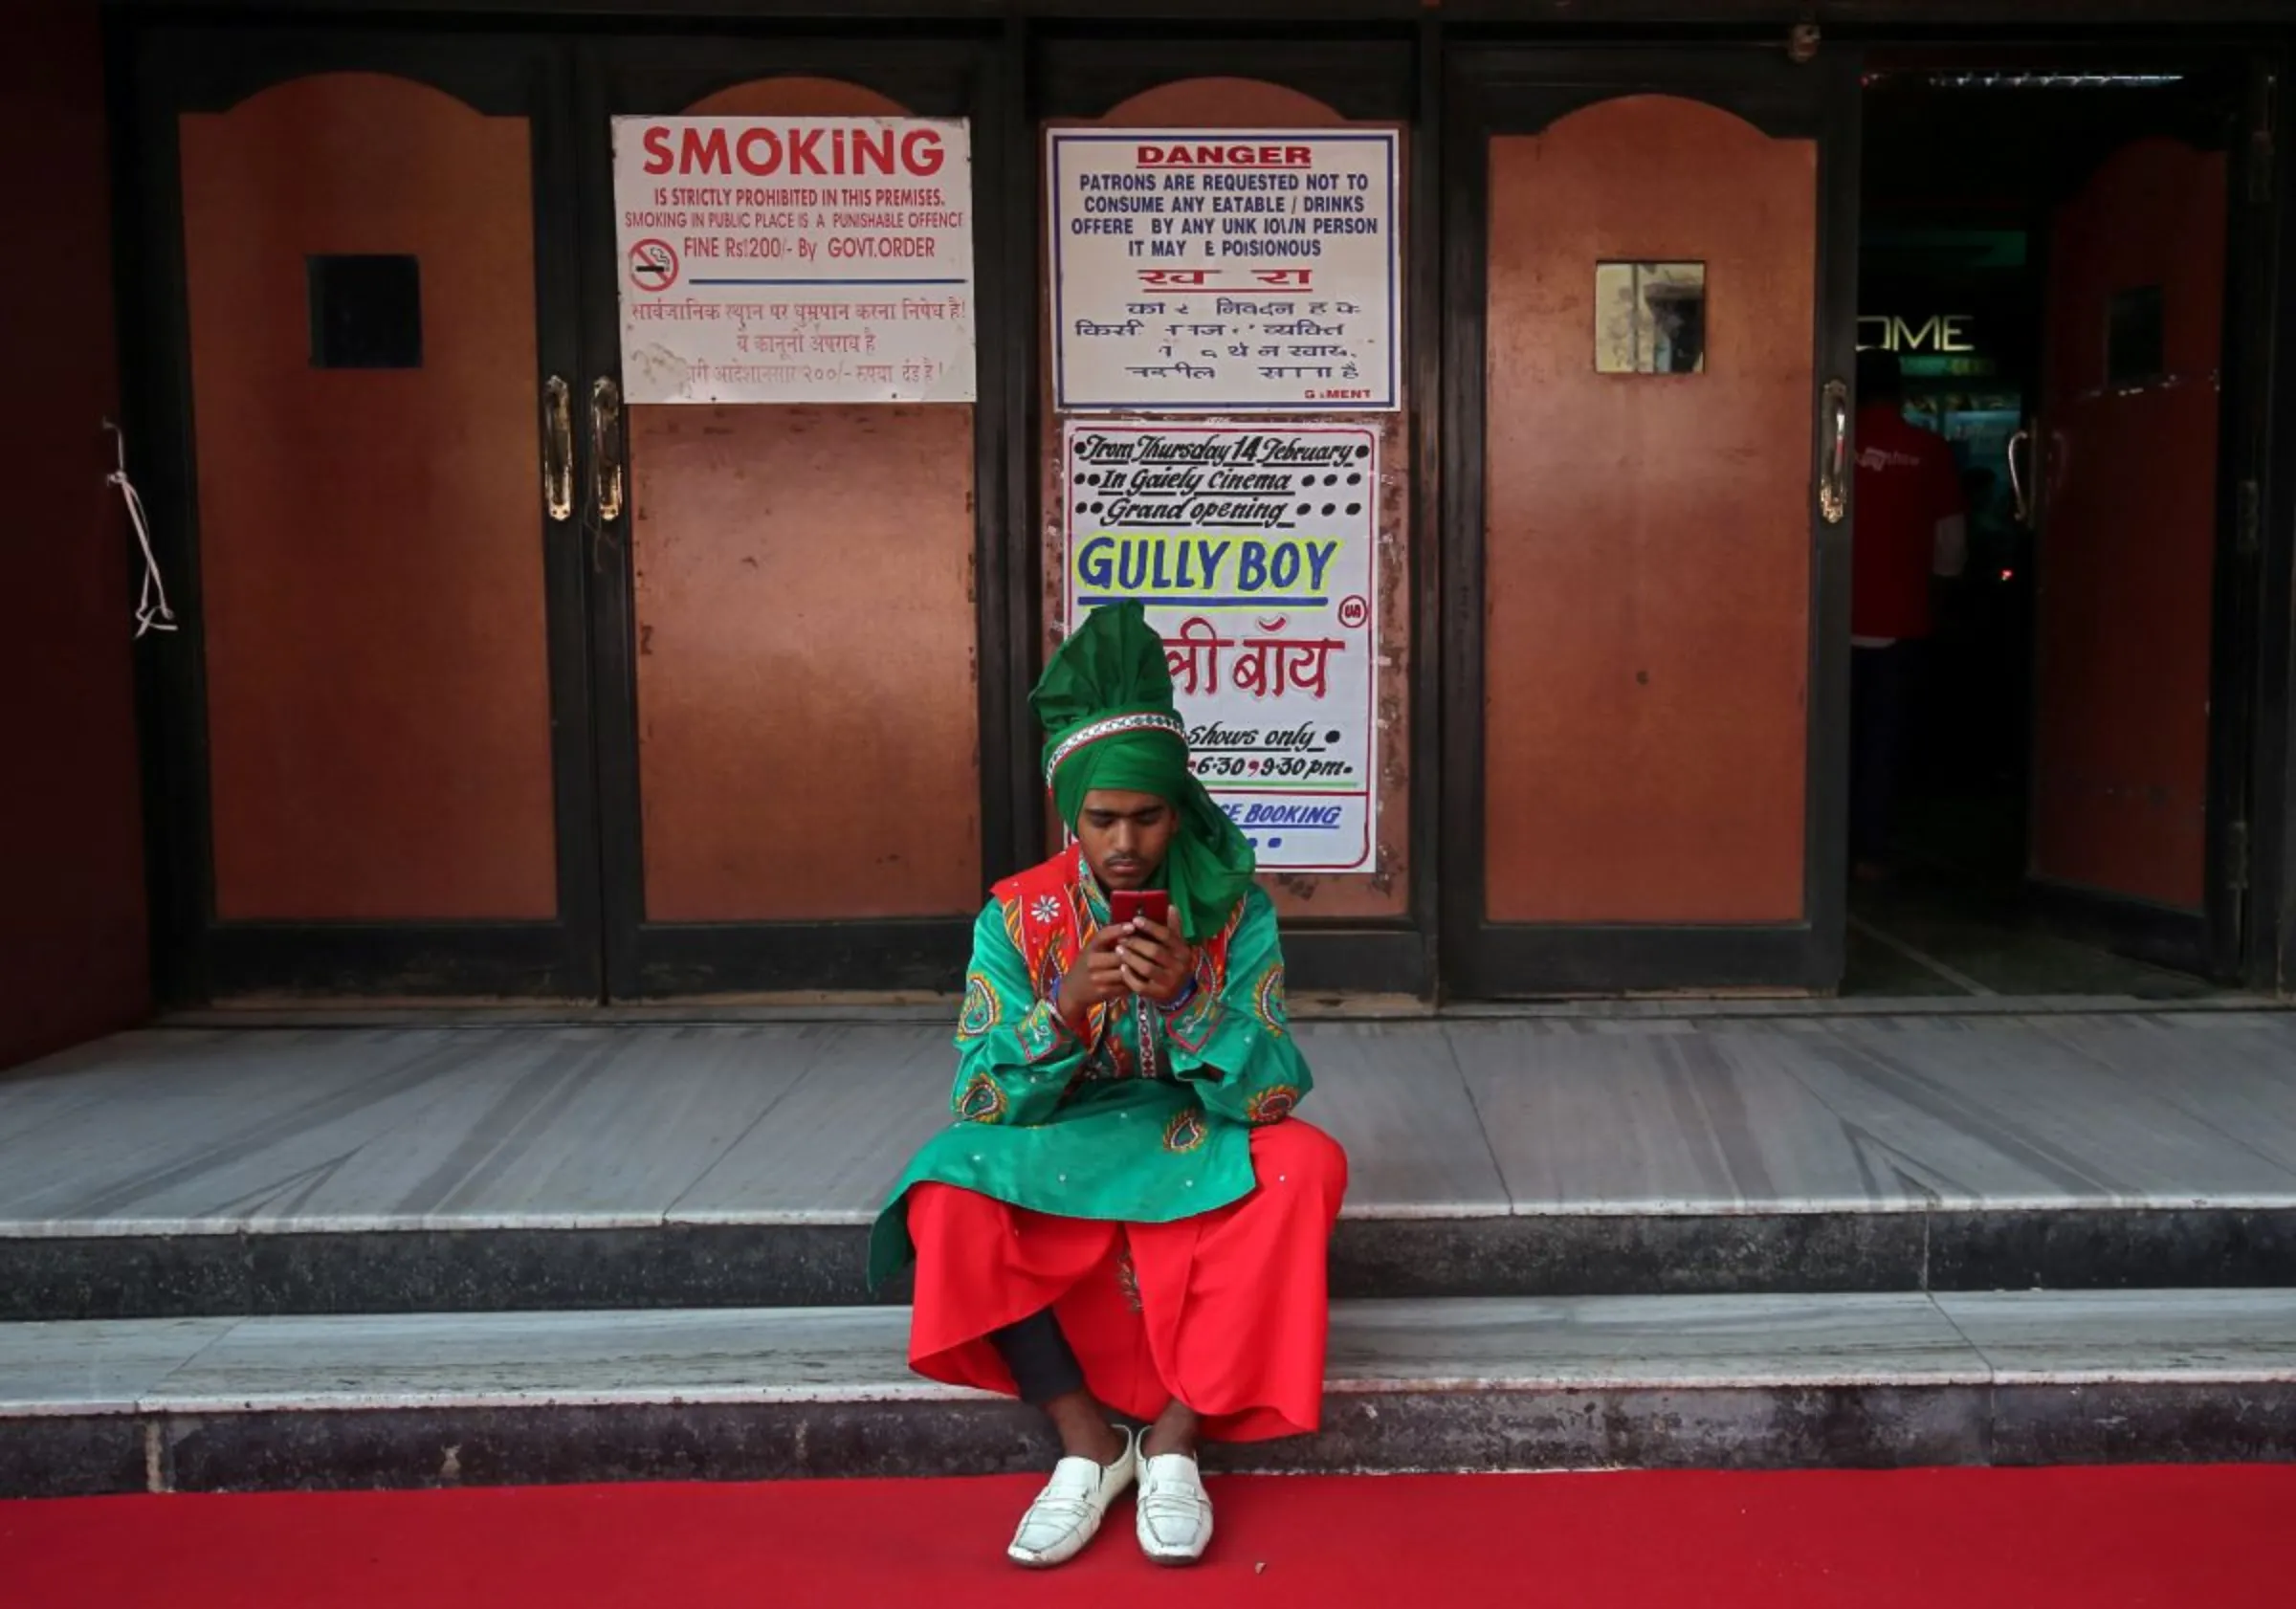 A man wearing traditional attire checks his mobile phone as he waits to perform before the launch of the trailer of a Bollywood movie outside a cinema in Mumbai, India, February 20, 2019. REUTERS/Francis Mascarenhas